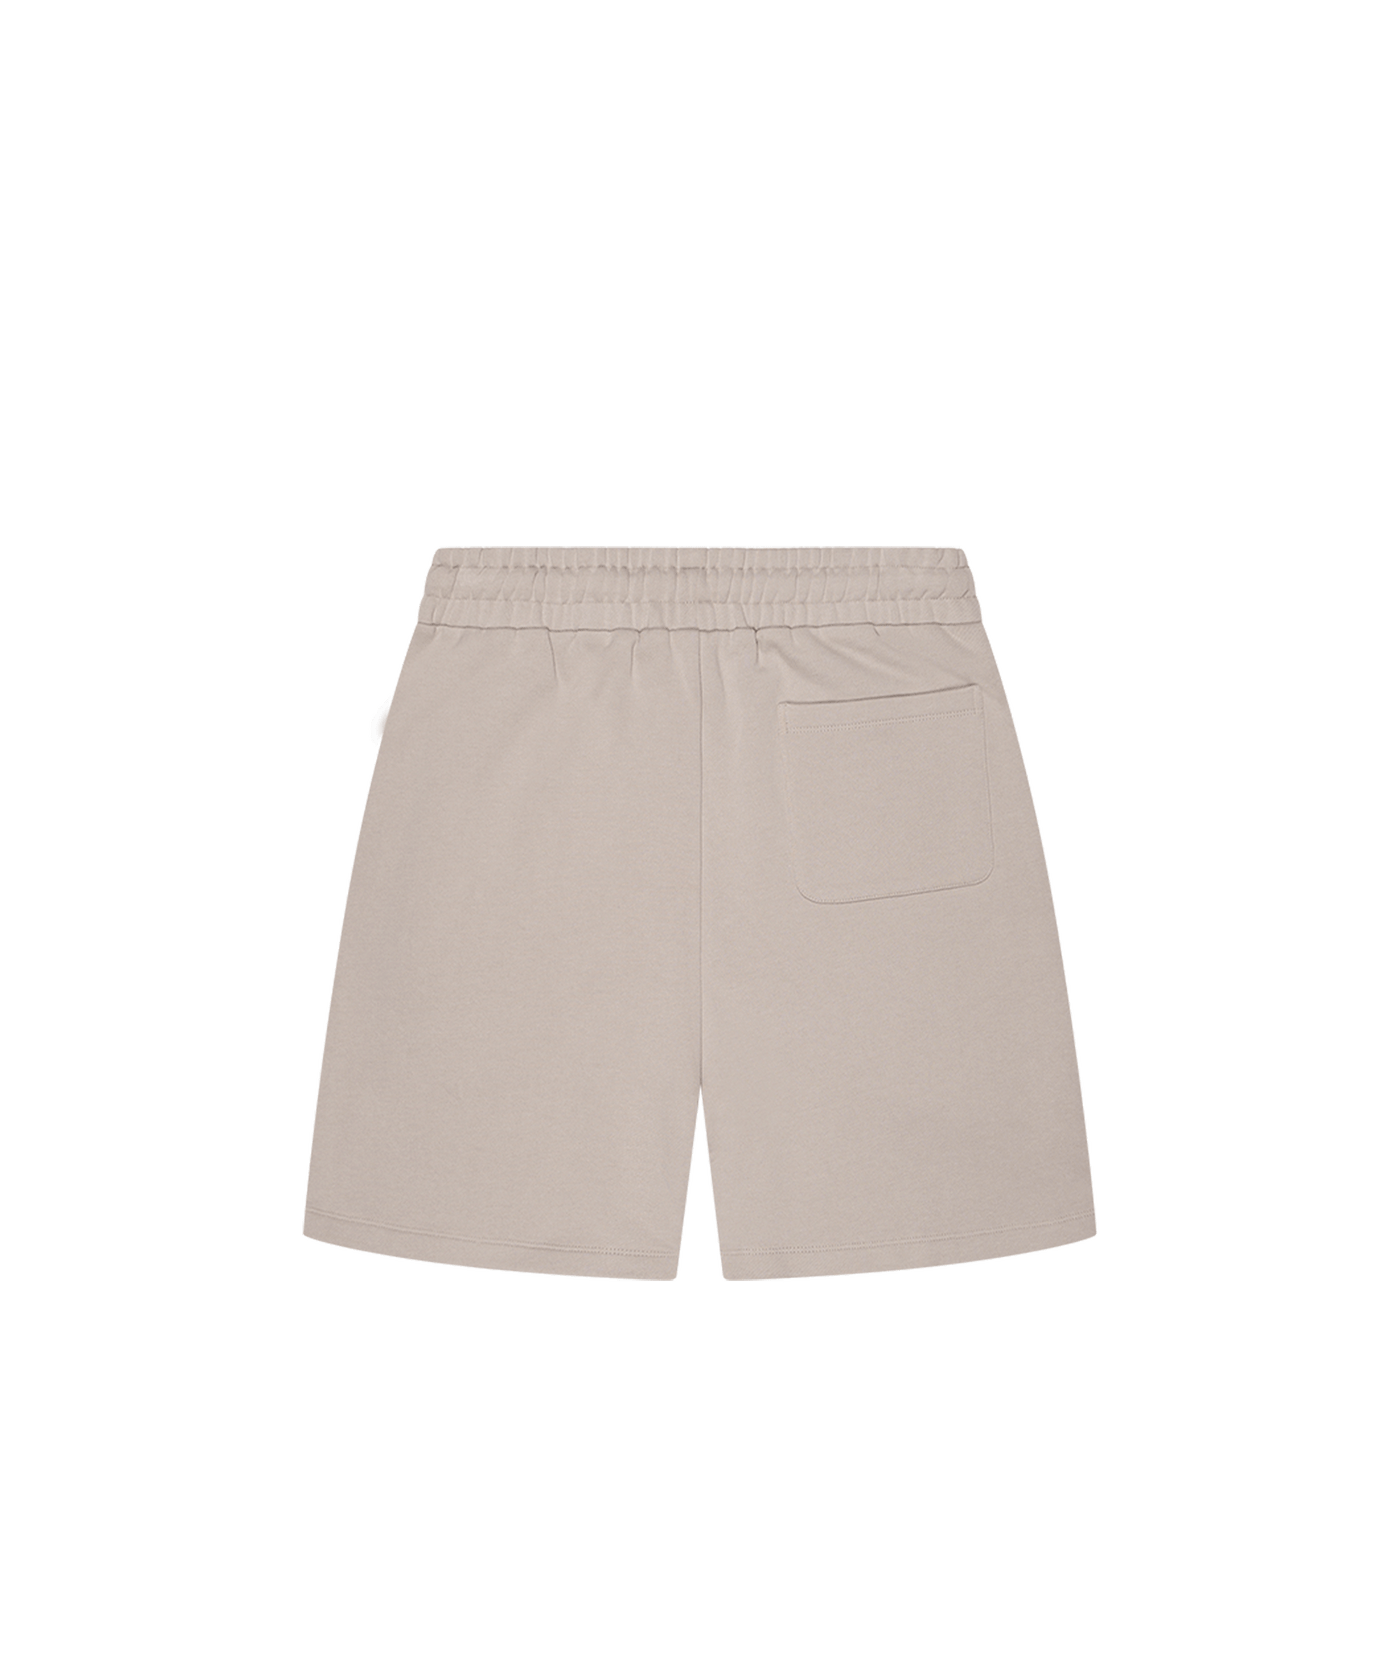 Quotrell - Atelier Milano - Shorts - Taupe/off White